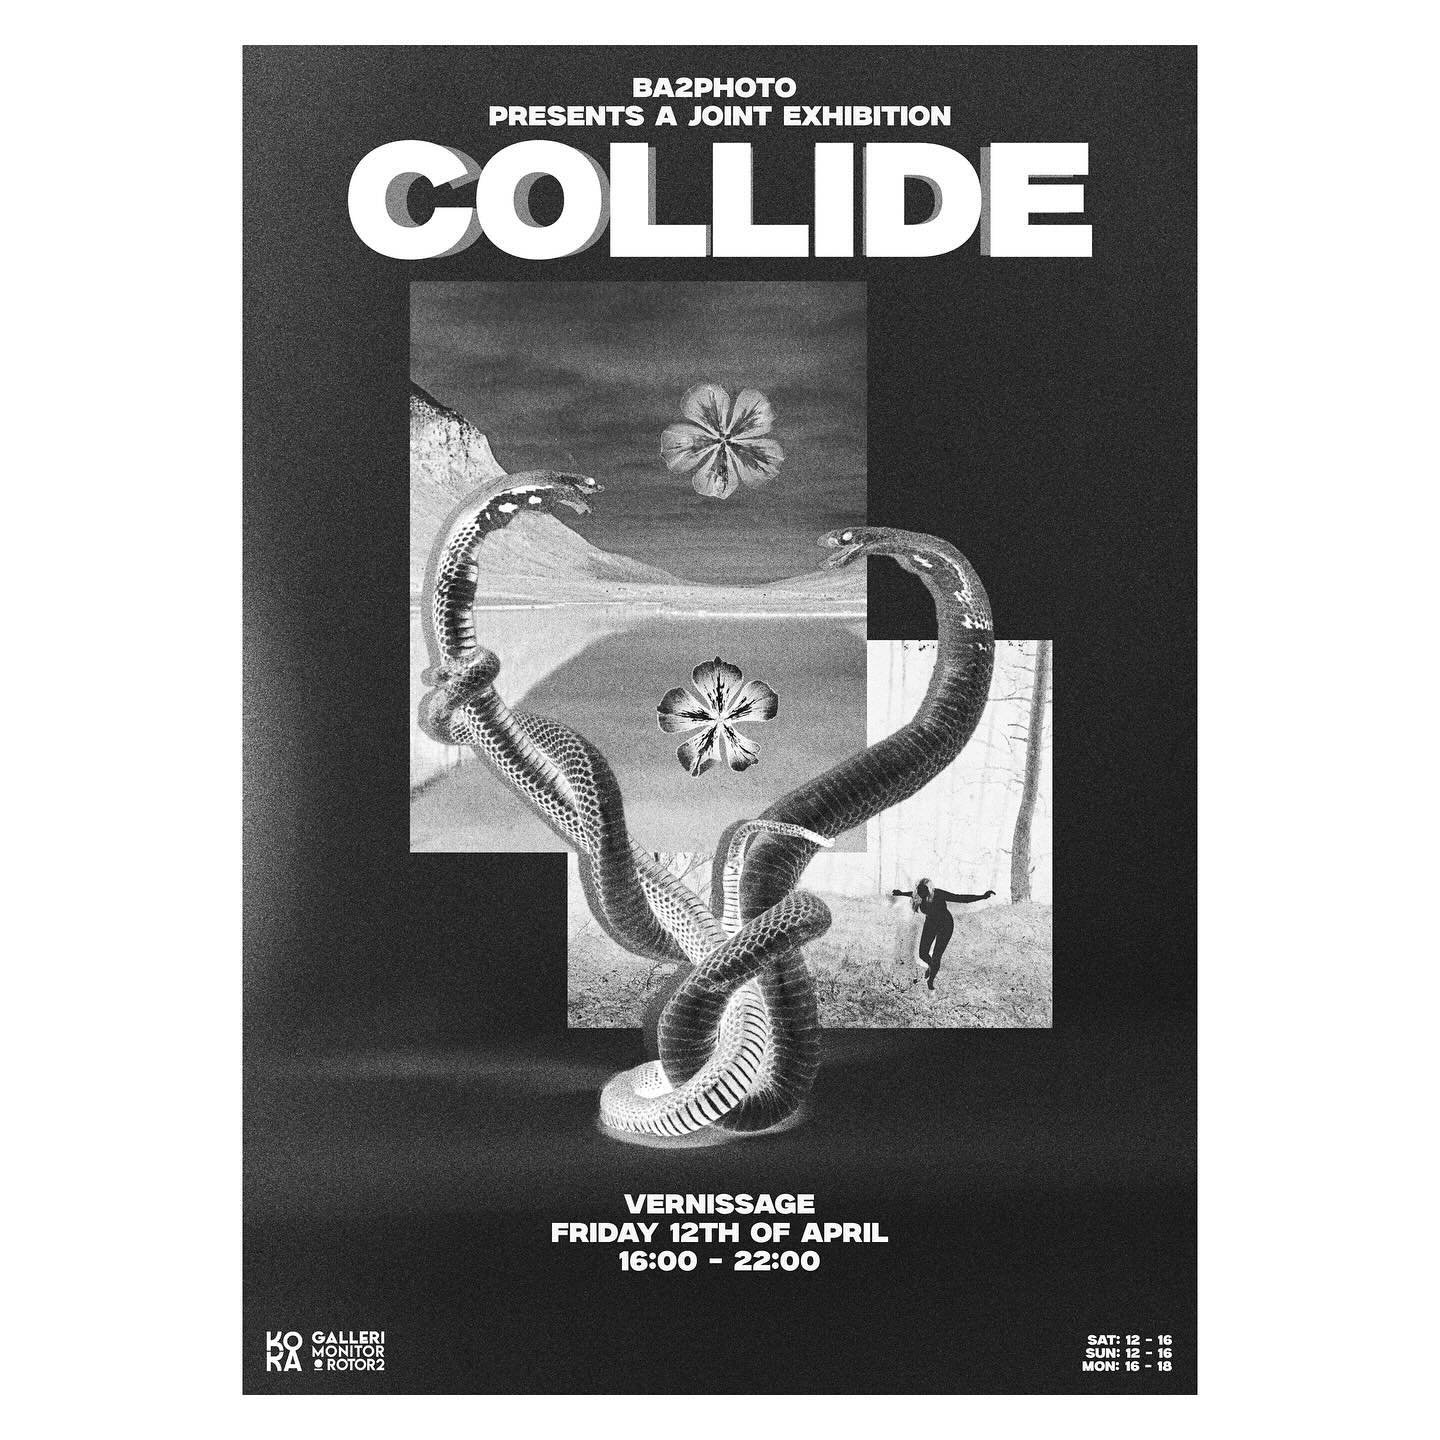 Collide

The second-year photography students at HDK-Valand present the group exhibition &rdquo;Collide&rdquo;. During the spring term, they have been working on individual projects with the exhibition space as the starting point, where a multitude o